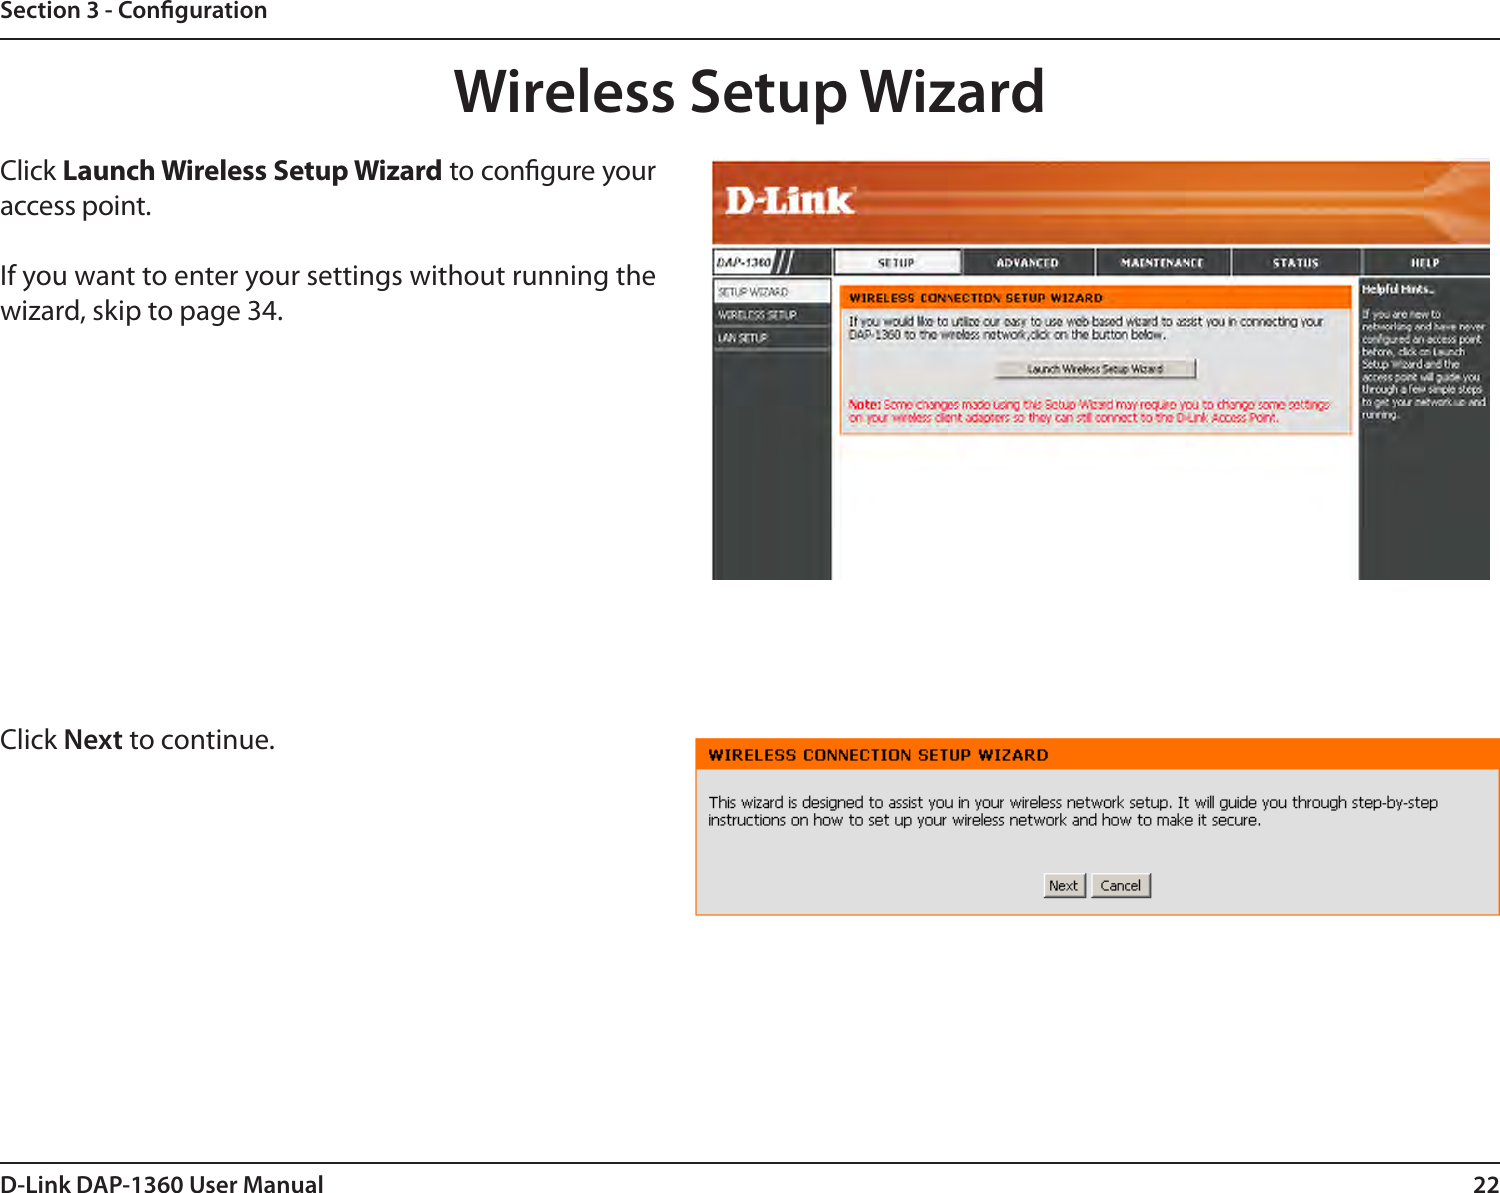 22D-Link DAP-1360 User ManualSection 3 - CongurationClick Launch Wireless Setup Wizard to congure your access point.If you want to enter your settings without running the wizard, skip to page 34.Wireless Setup WizardClick Next to continue. 